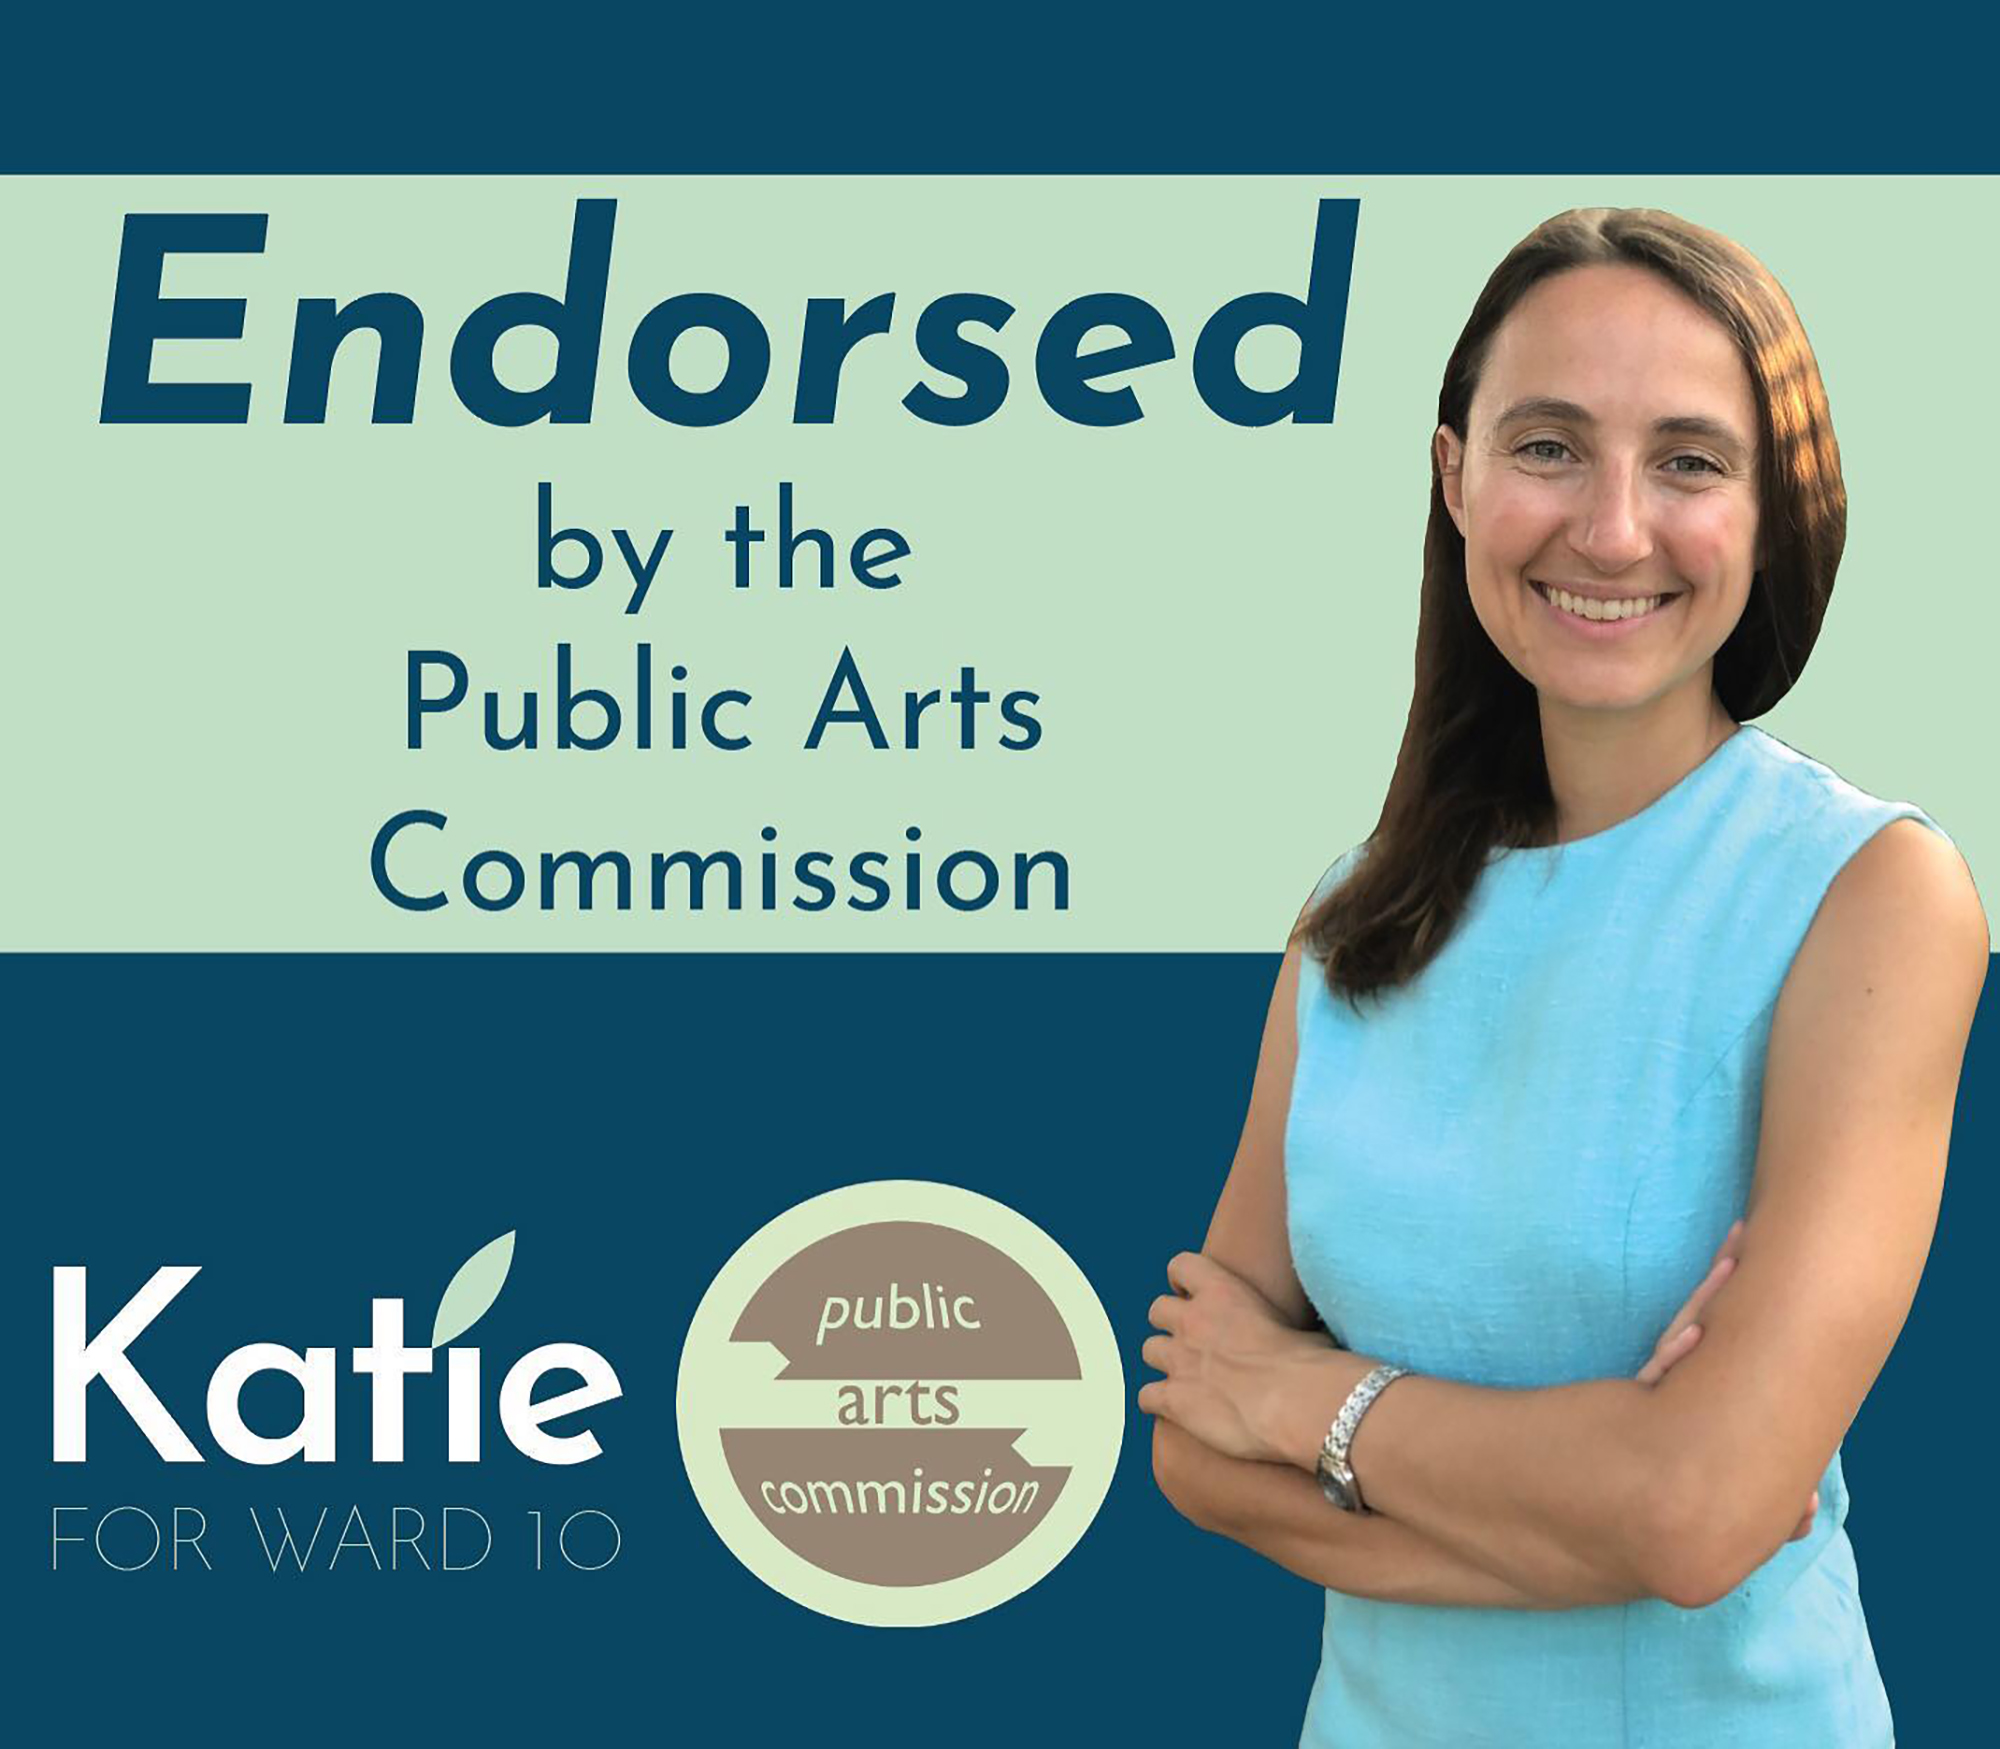 Katie Jones for Ward 10 endorsed by public arts commission